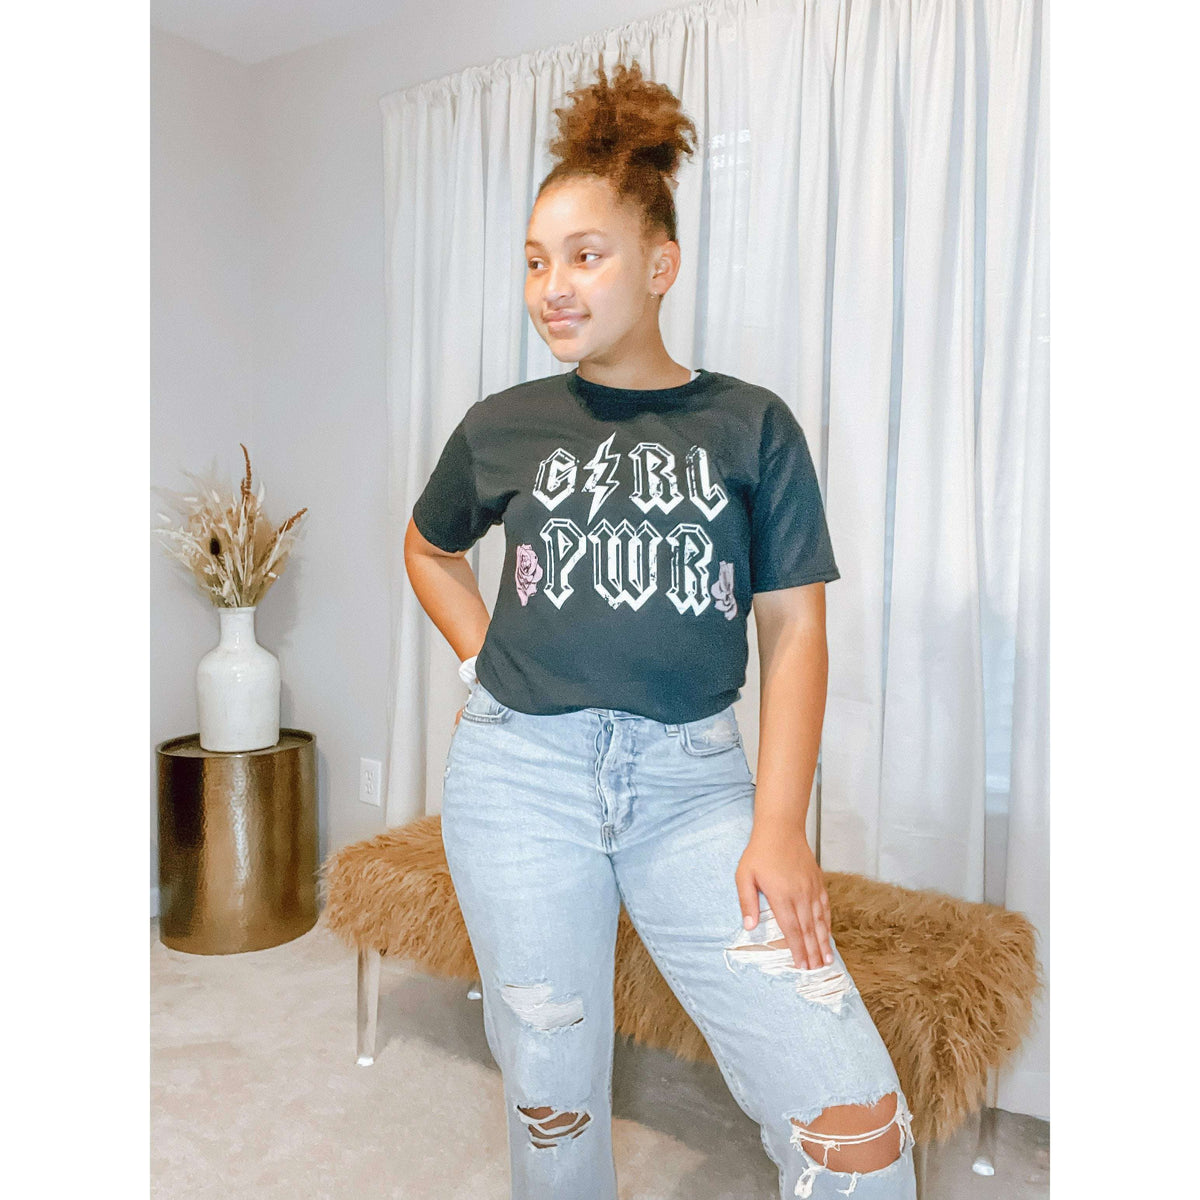 Girl Power Tee (Kids) - The Hive by Chris Jesselle